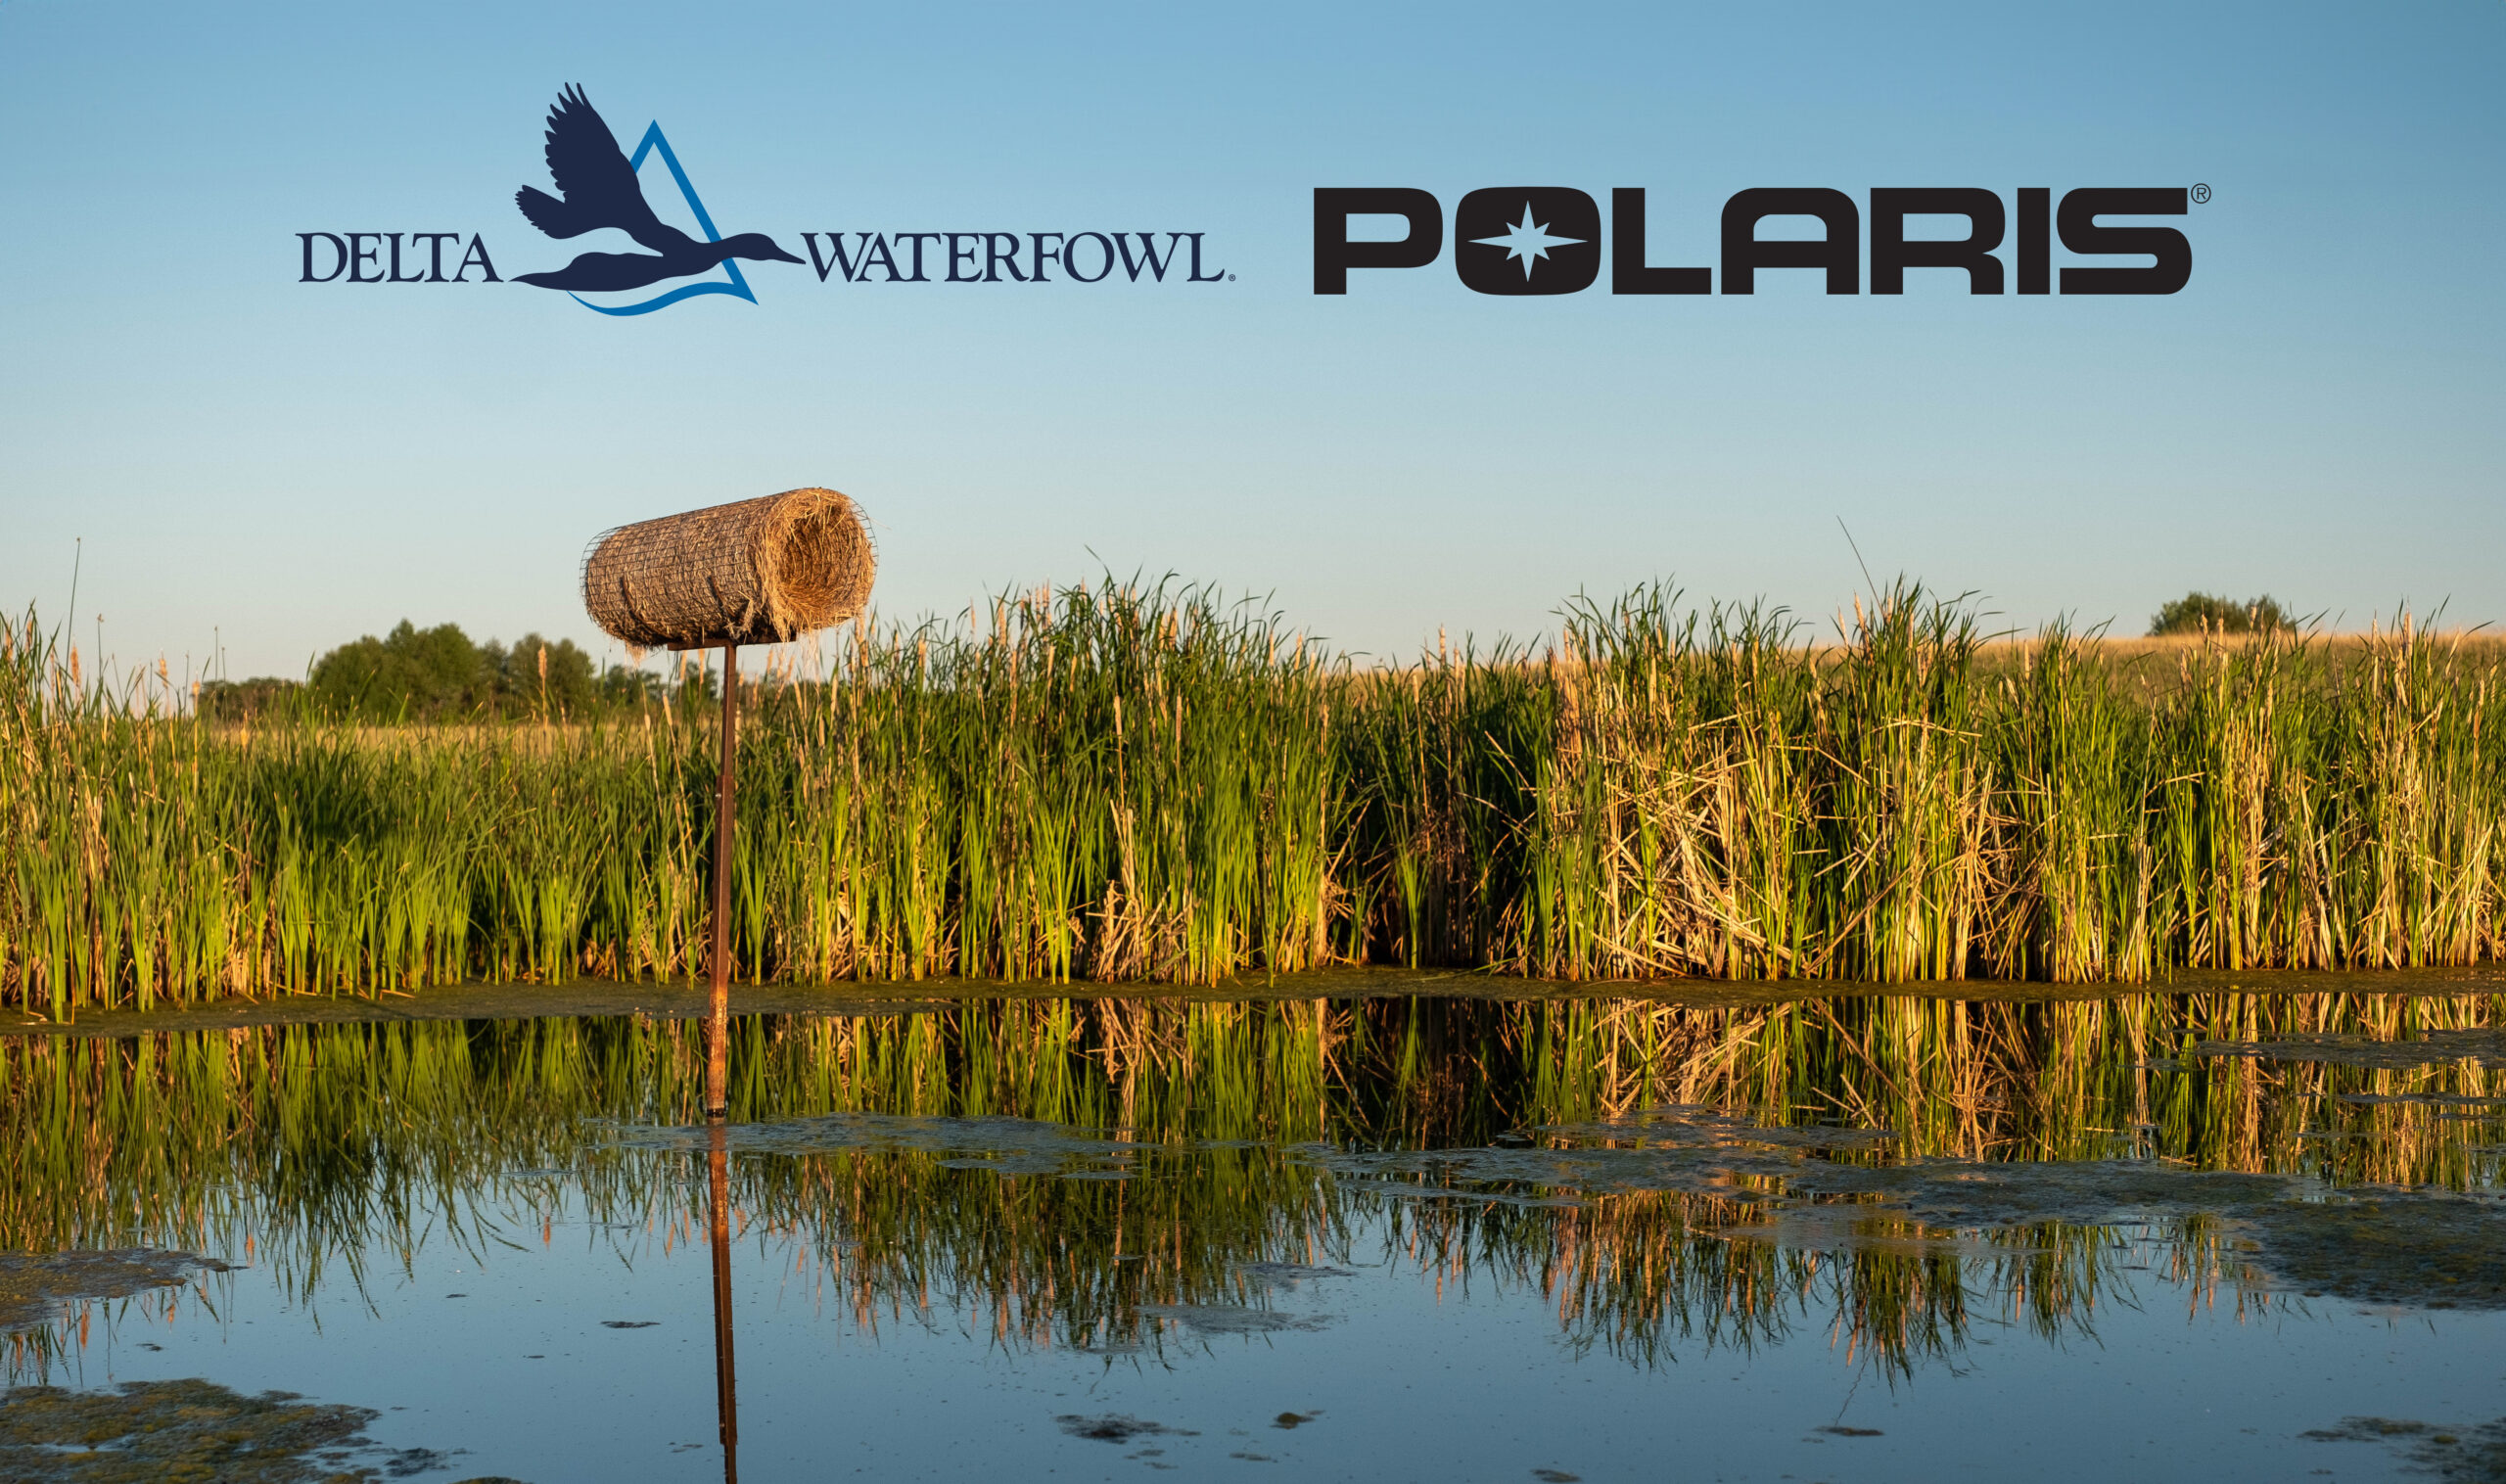 A Delta Waterfowl Hen House stands in a wetland in the PPR. The Delta Waterfowl and Polaris logos appear overhead.